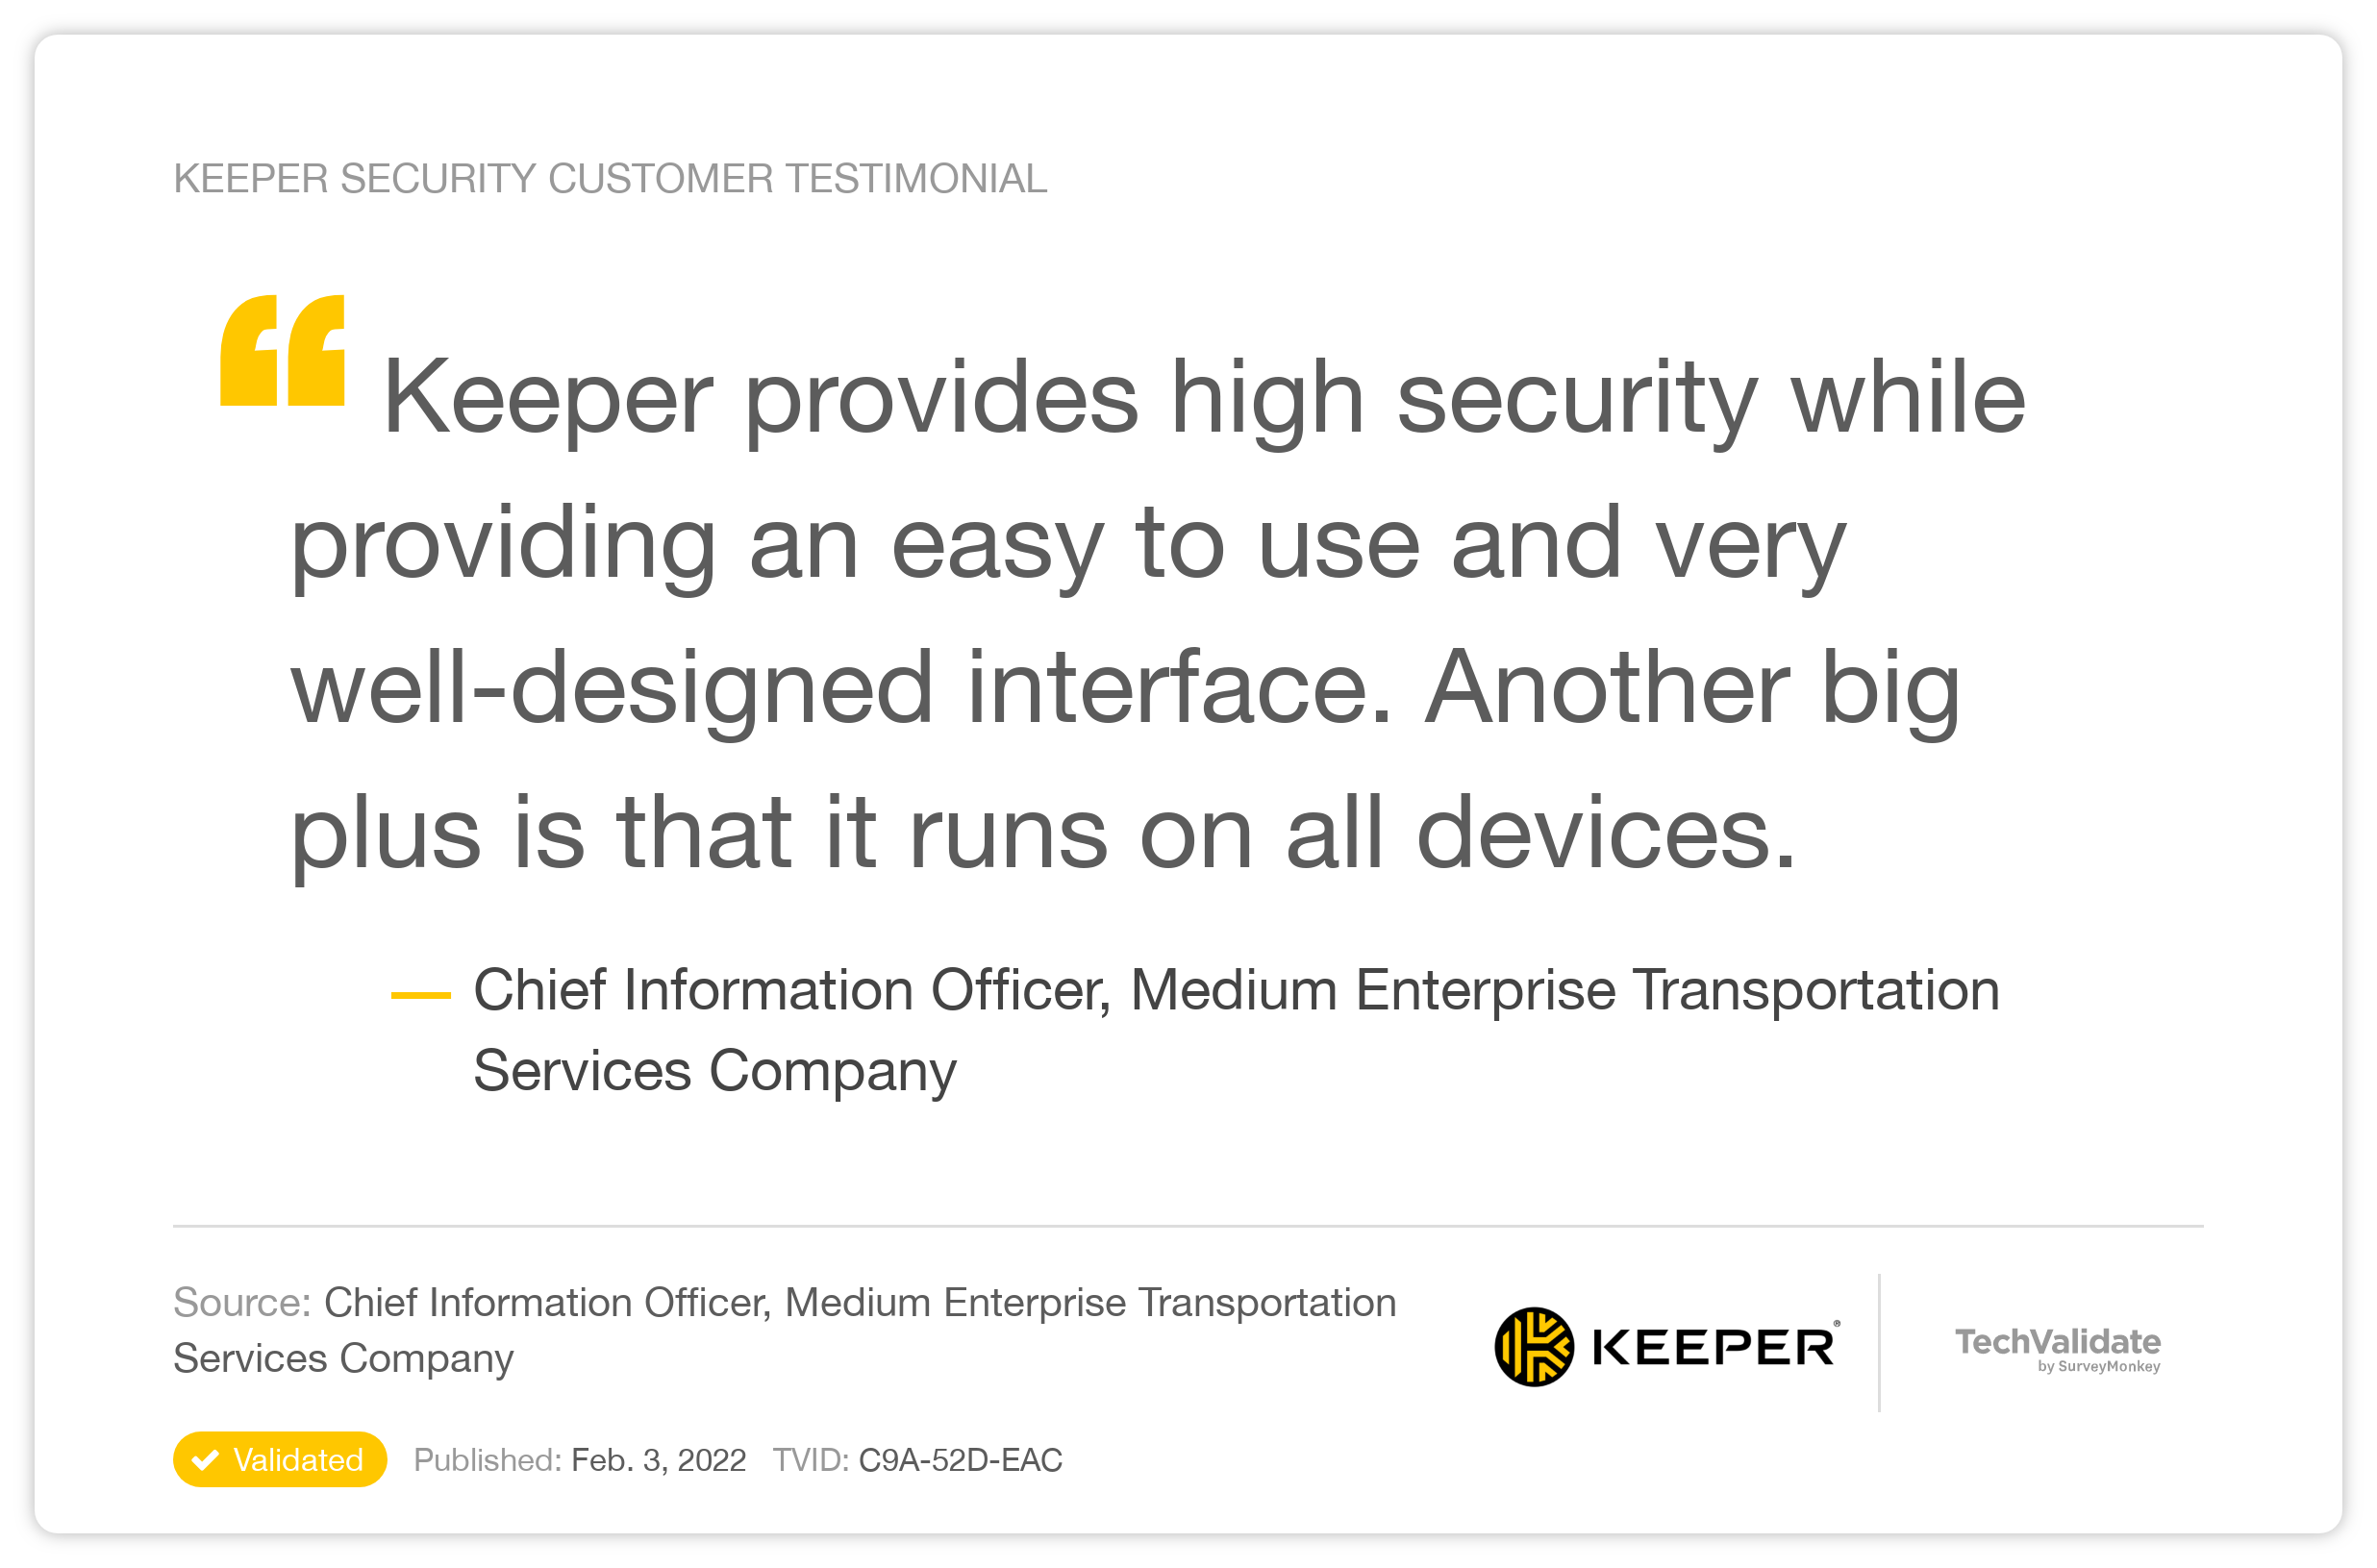 Keeper provides high security while providing an easy to use and very well-designed interface. Another big plus is that it runs on all devices